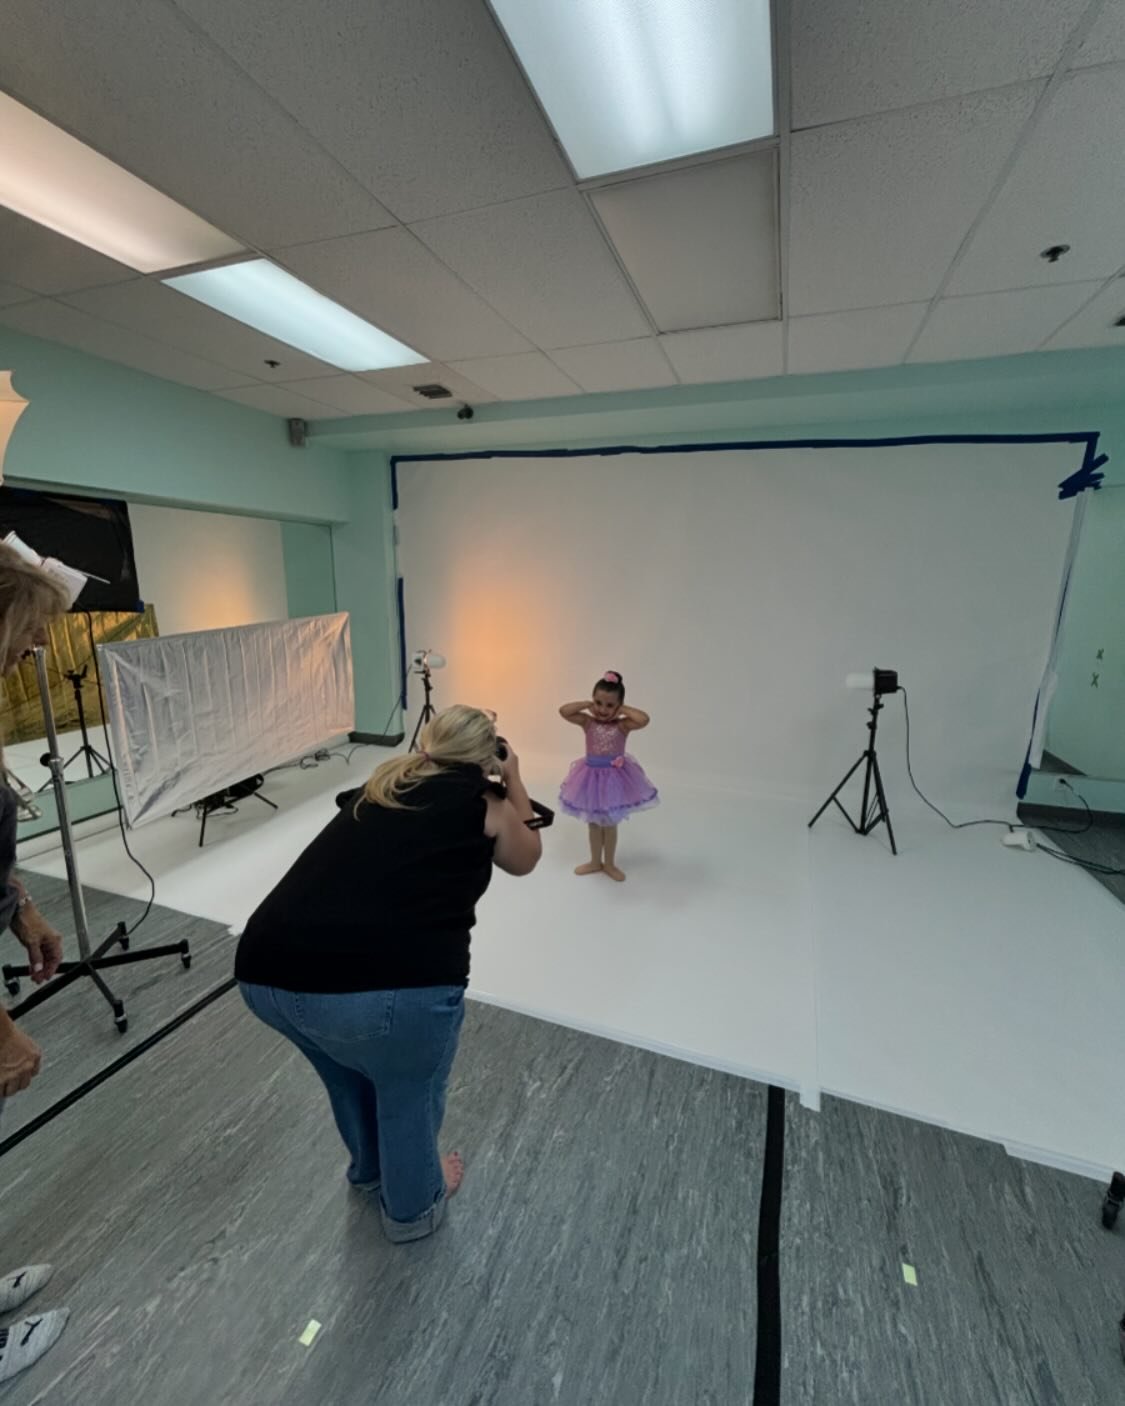 Happy photo week! 

It&rsquo;s not too late to sign up for individual photos! 
Email info@academydmt.com 

#westpalmbeach #palmbeachgardens #palmbeach #northpalmbeach #dancestudio #admt
#photoweek #individualportraits #recital #dancerecital